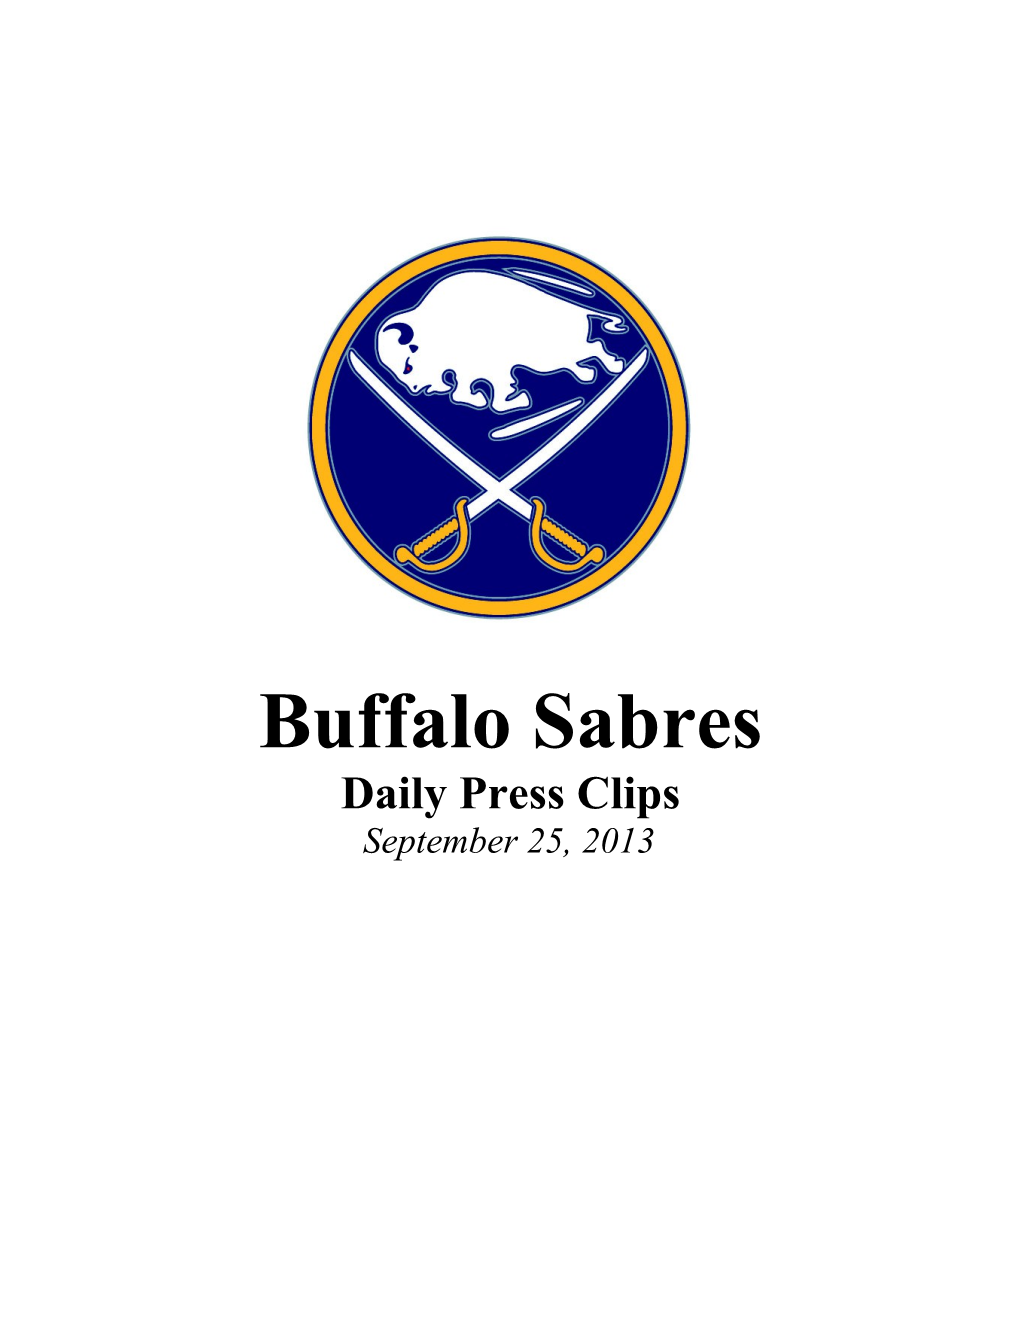 Press Clips September 25, 2013 Sabres Stay Patient While Rebuilding Through Youth by John Wawrow Associated Press September 24, 2013